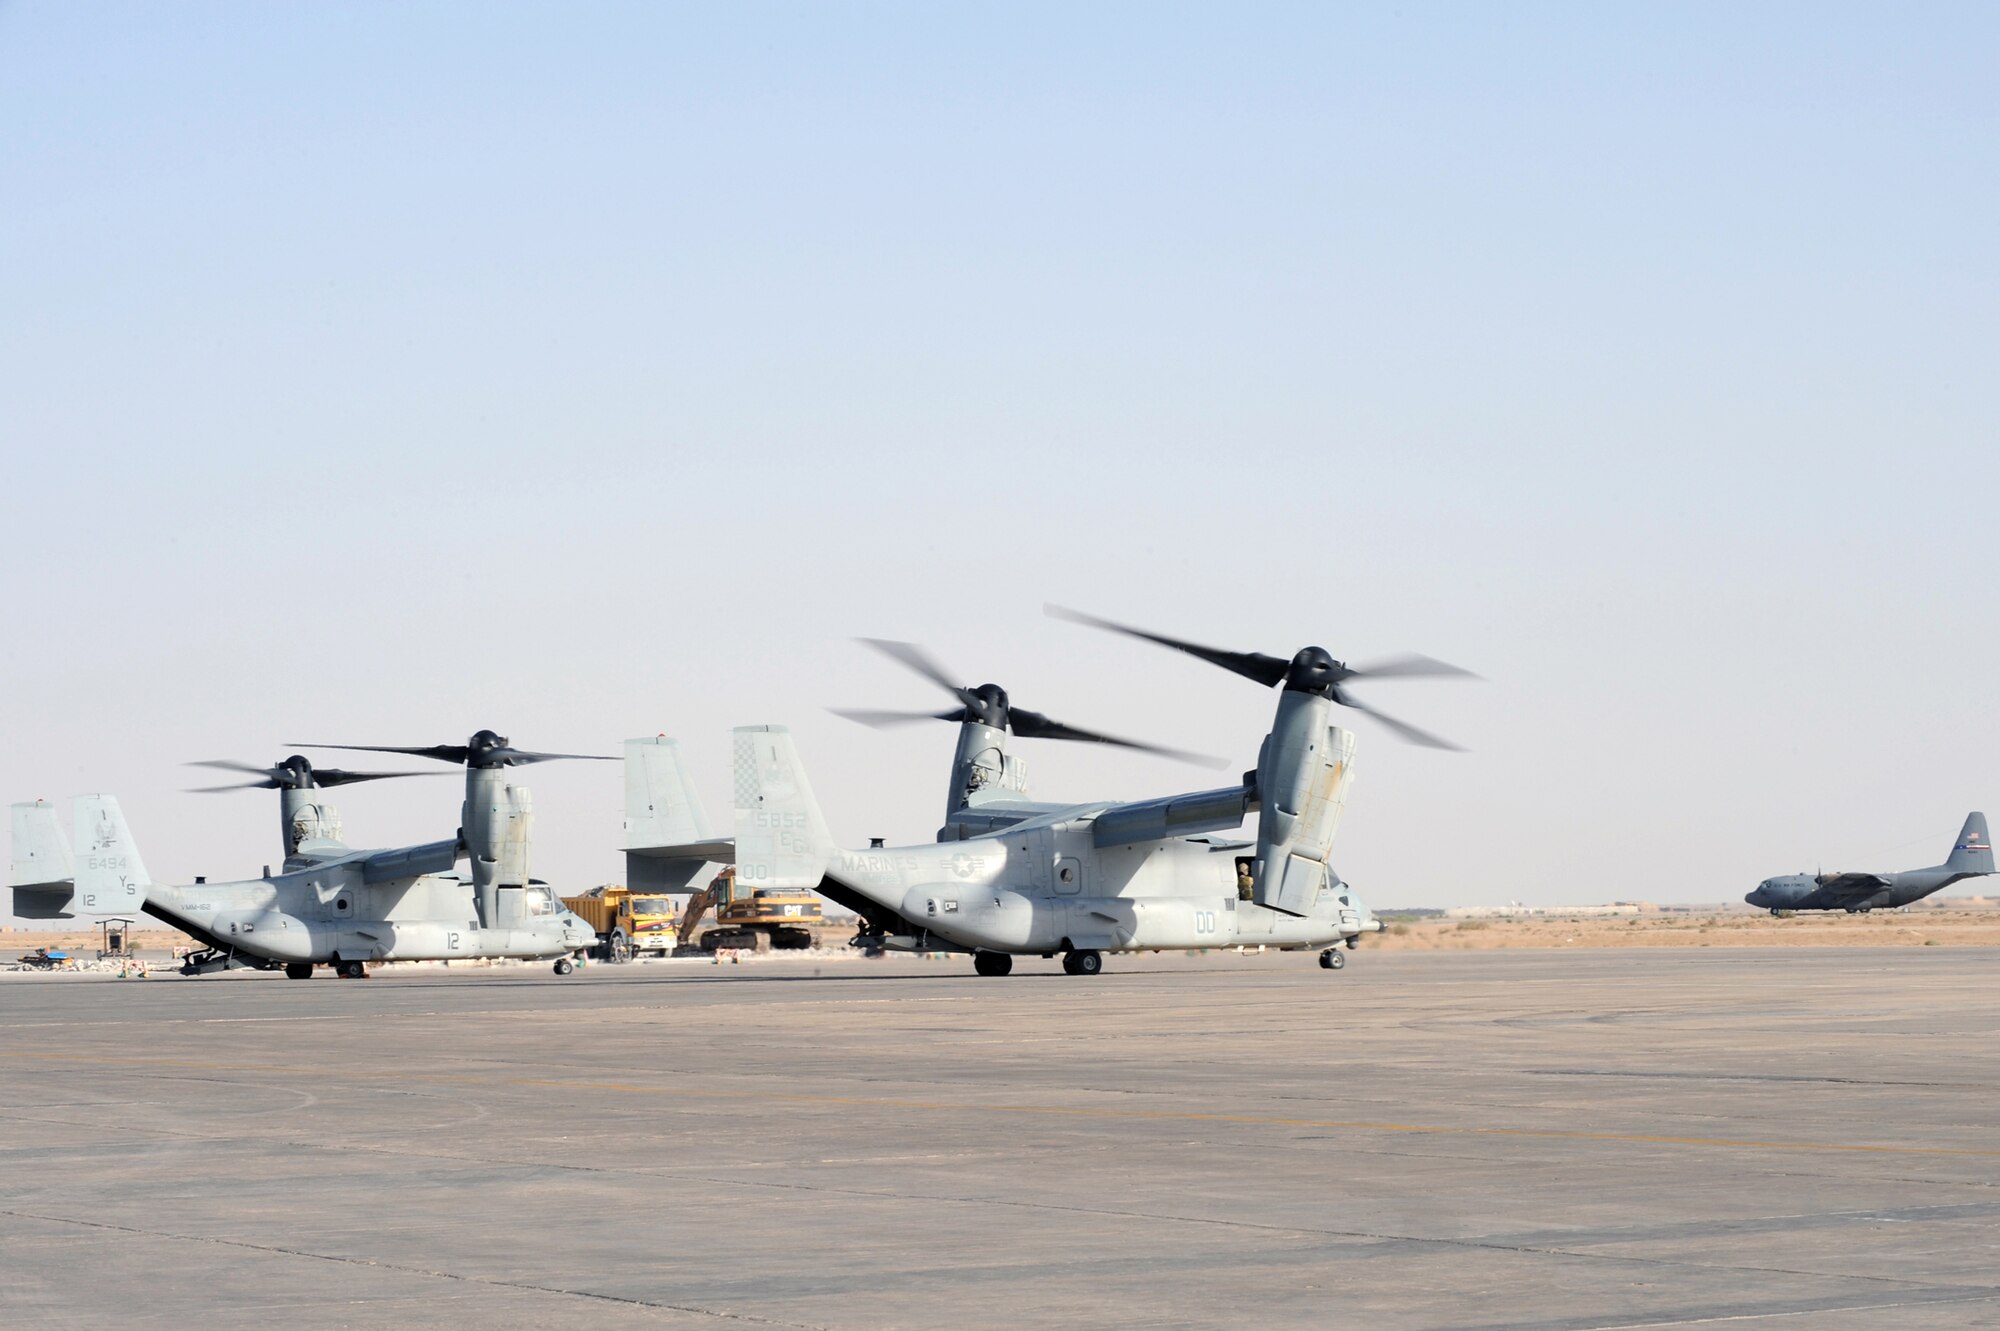 ALI BASE, Iraq -- V-22 Osprey's wait for takeoff as a C-130 arrives here April 24.  The V-22 Osprey is an aircraft used to transport Airmen, Troops, and cargo.  (U. S. Air Force photo / Tech. Sgt. Sabrina Johnson)  